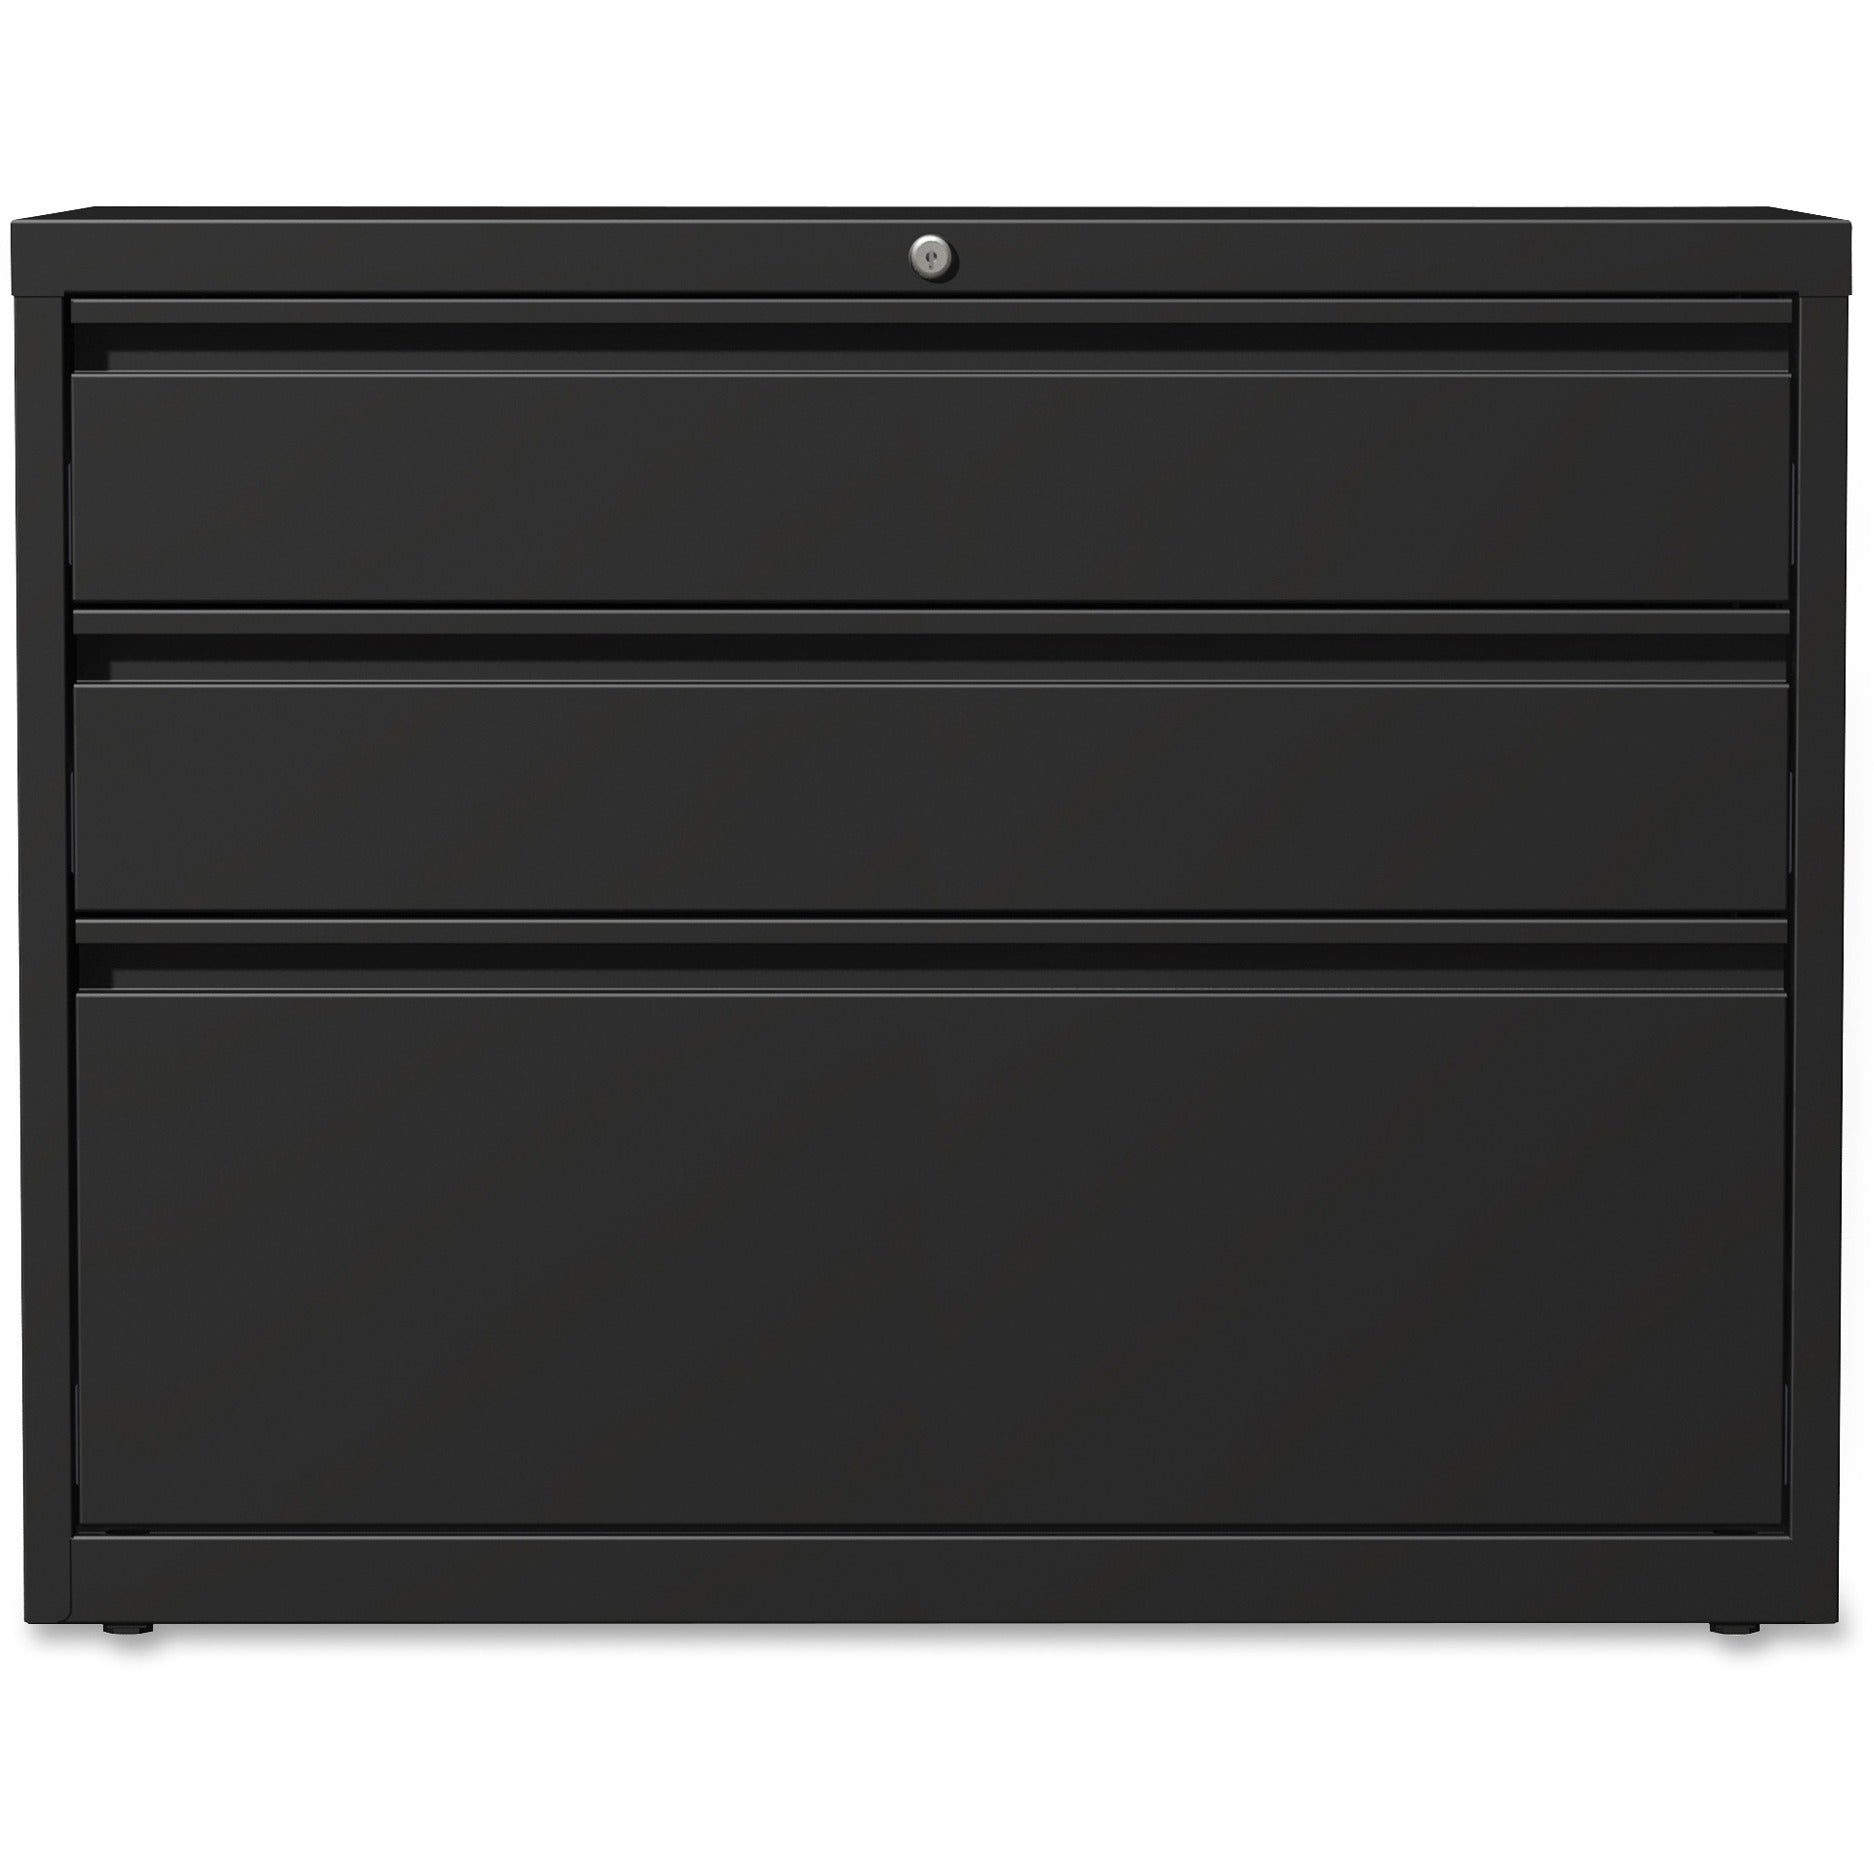 lorell-36-box-box-file-lateral-file-cabinet-36-x-186-x-28-3-x-drawers-for-box-file-a4-legal-letter-lateral-hanging-rail-locking-drawer-ball-bearing-suspension-magnetic-label-holder-interlocking-durable-reinforced-base-level_llr60929 - 2